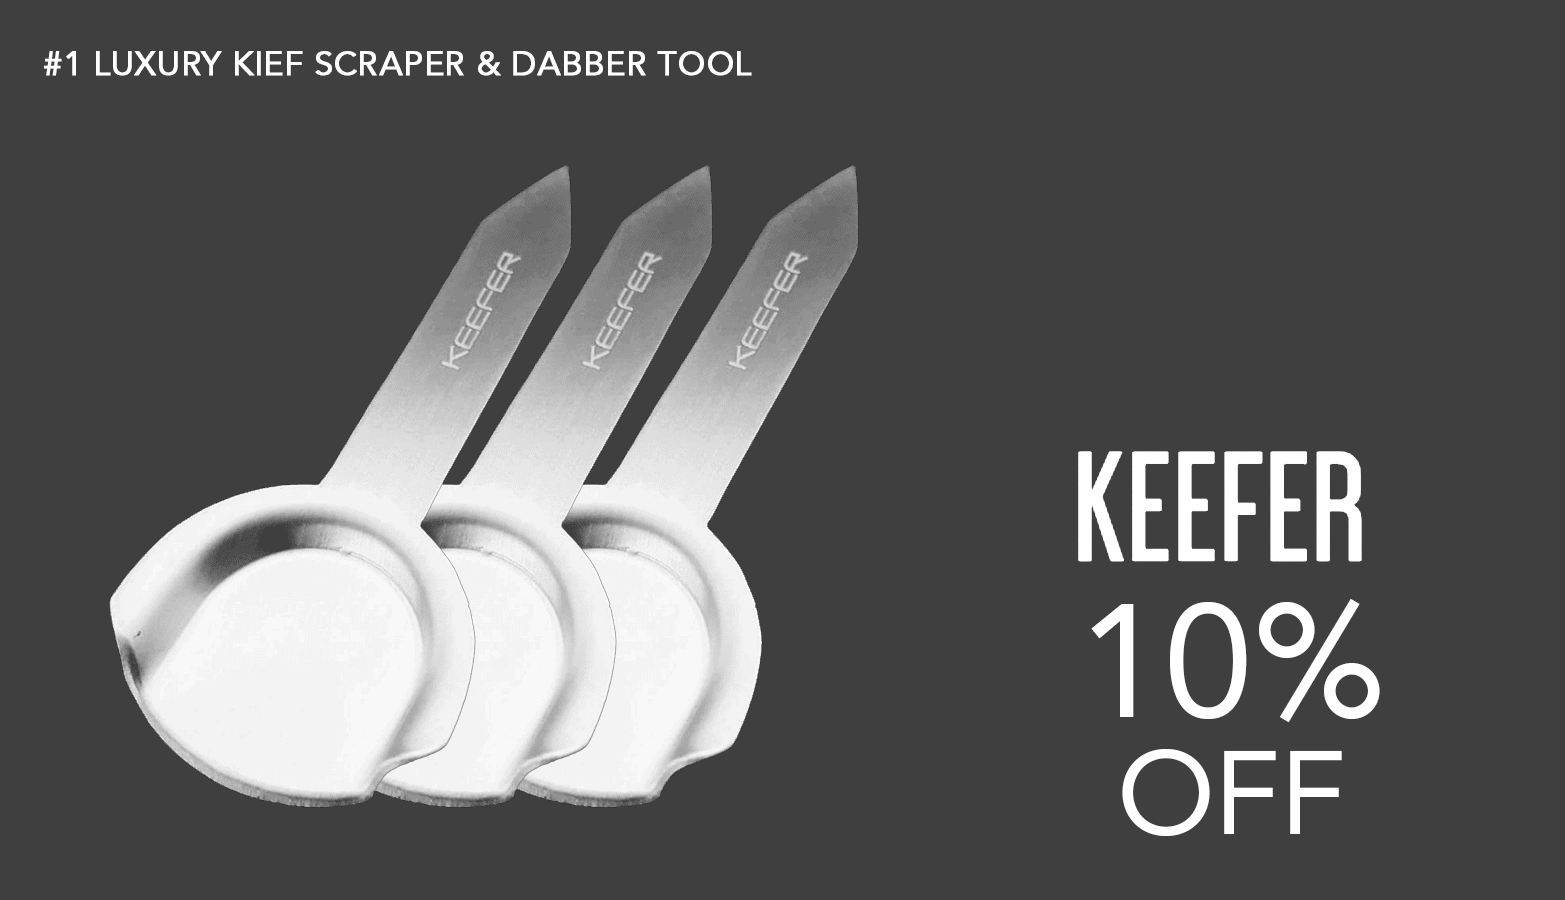 Keefer Dab Tools Coupon Code Offer Website